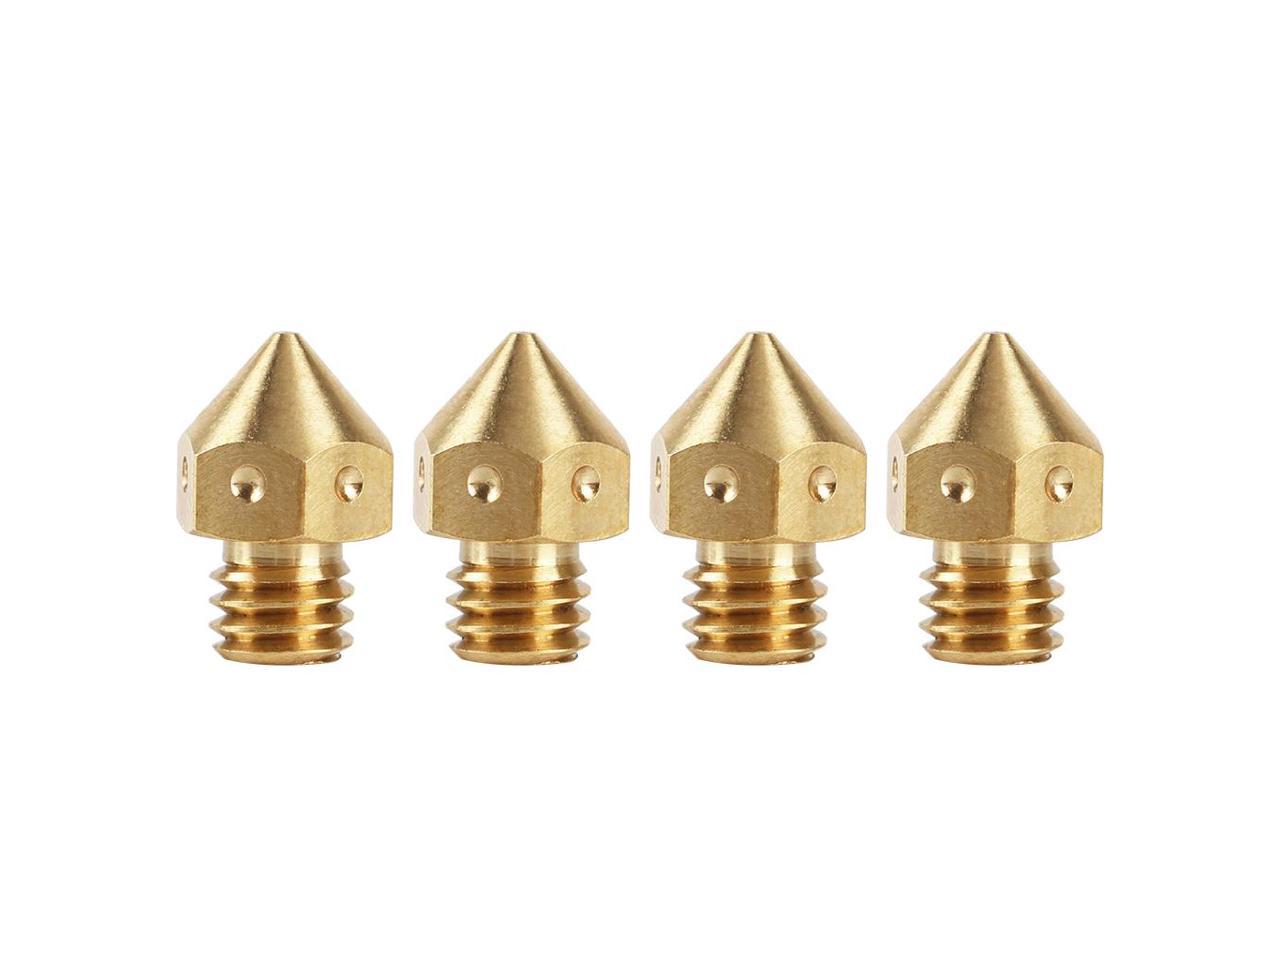 4Pieces MK8 Brass Nozzle 0.4mm Head 3D Printer Accessories for Ender-3 CR-10